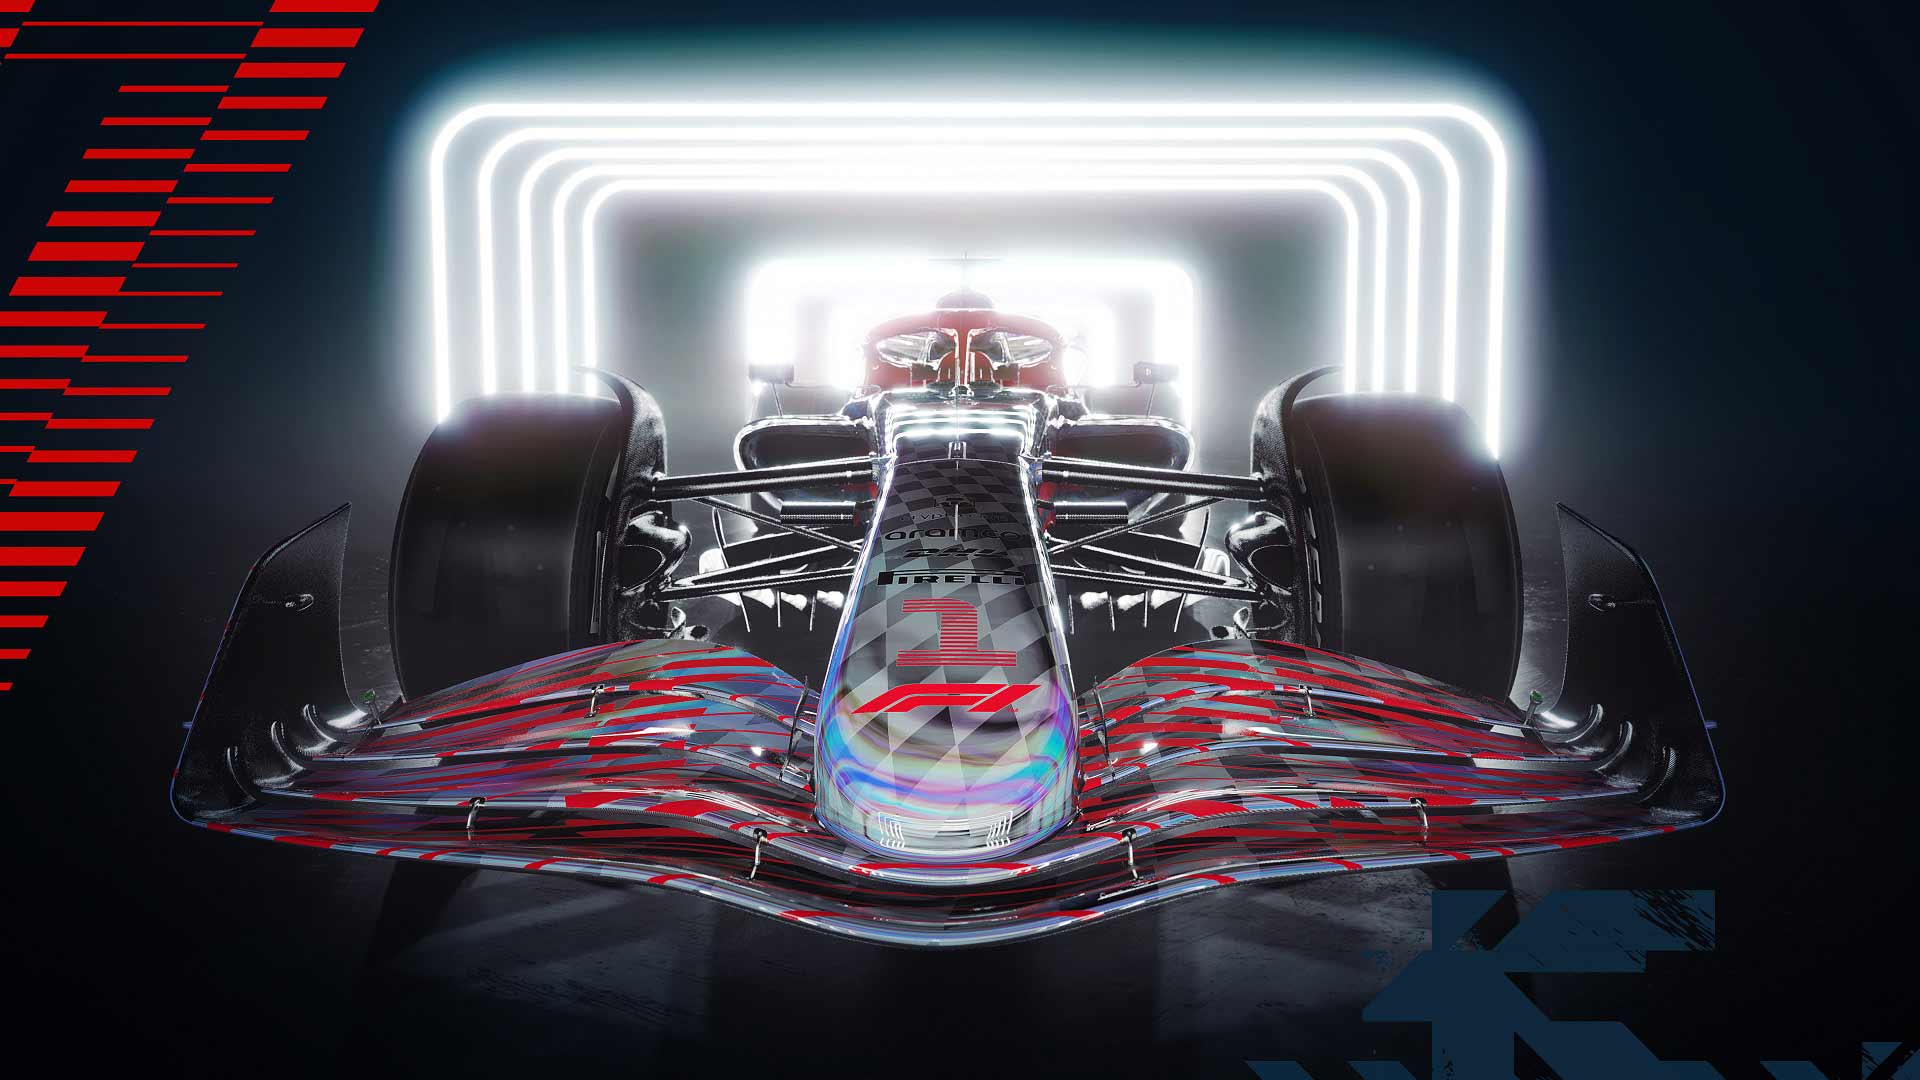 Heres How F1 22 Racing Looks in VR, Coming in July